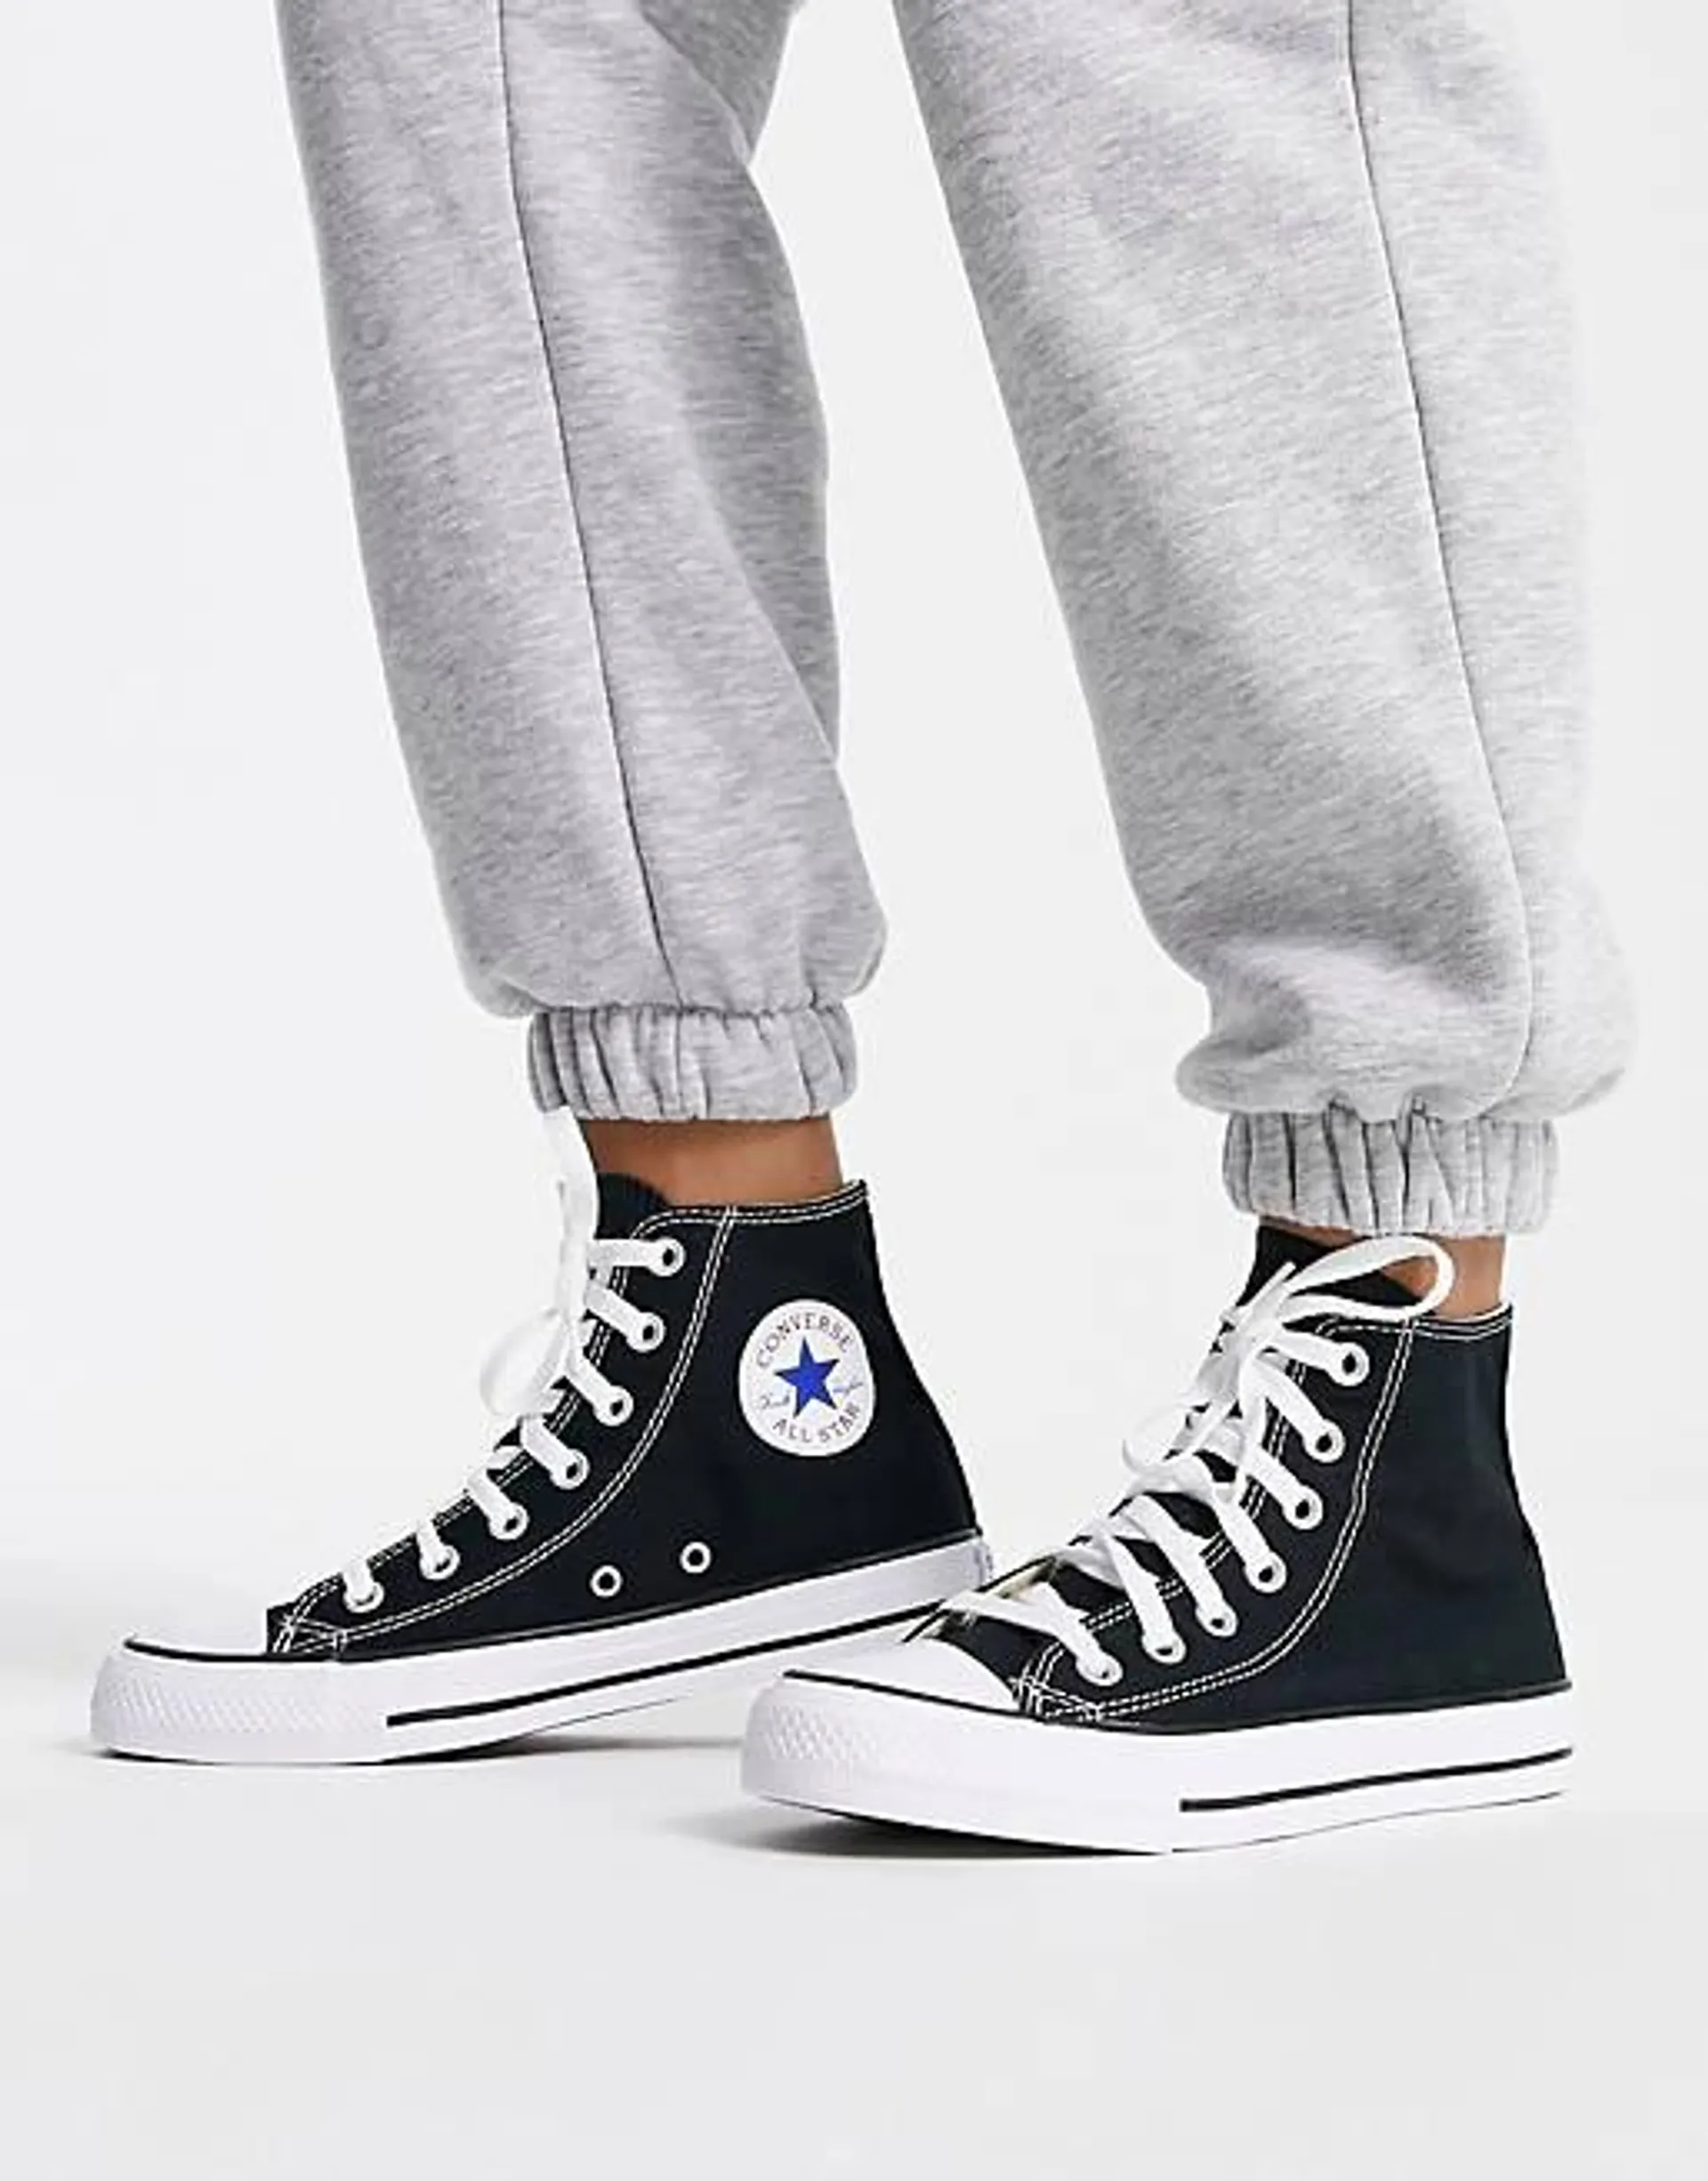 Converse Chuck Taylor All Star Hi unisex trainers in black